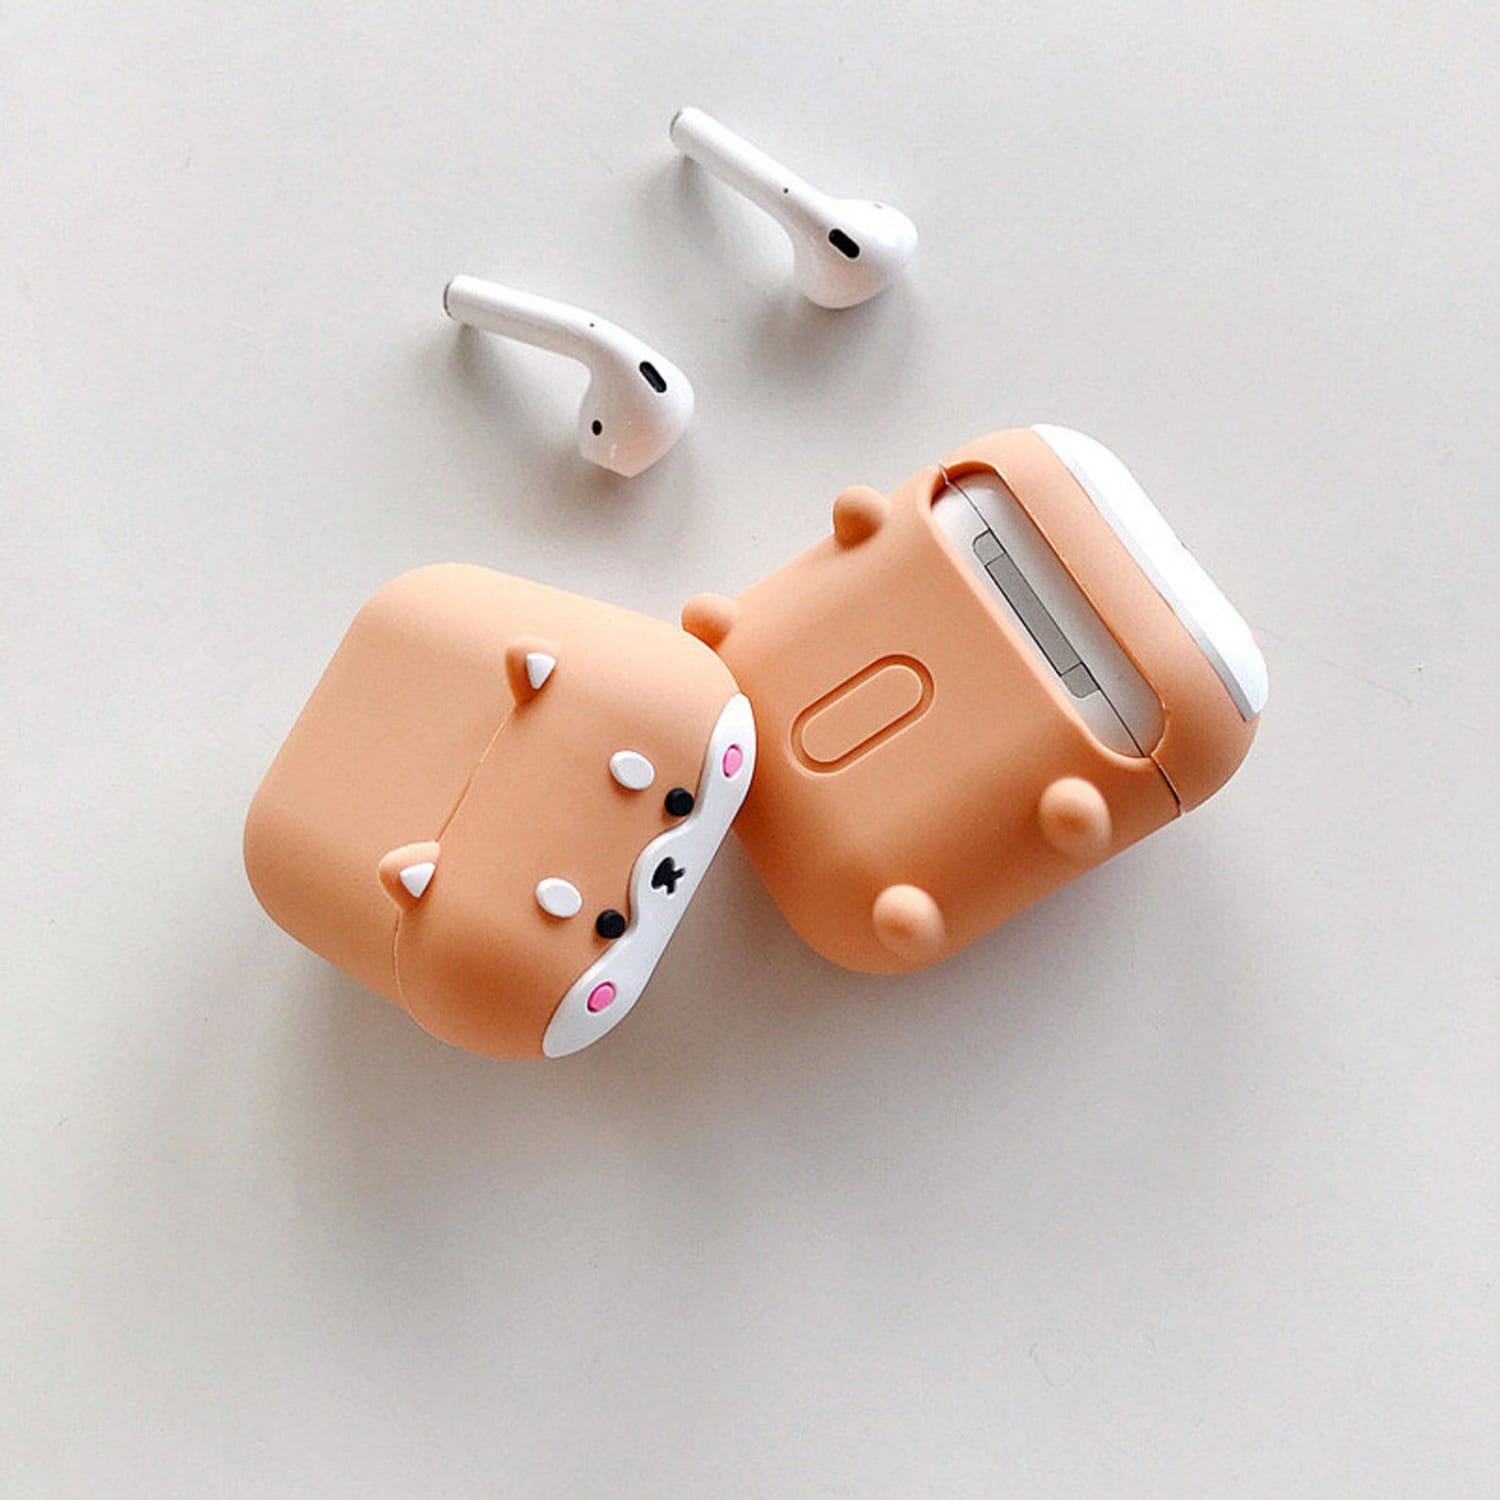 Sweet Sin - Apple Airpods Pro Case Cover